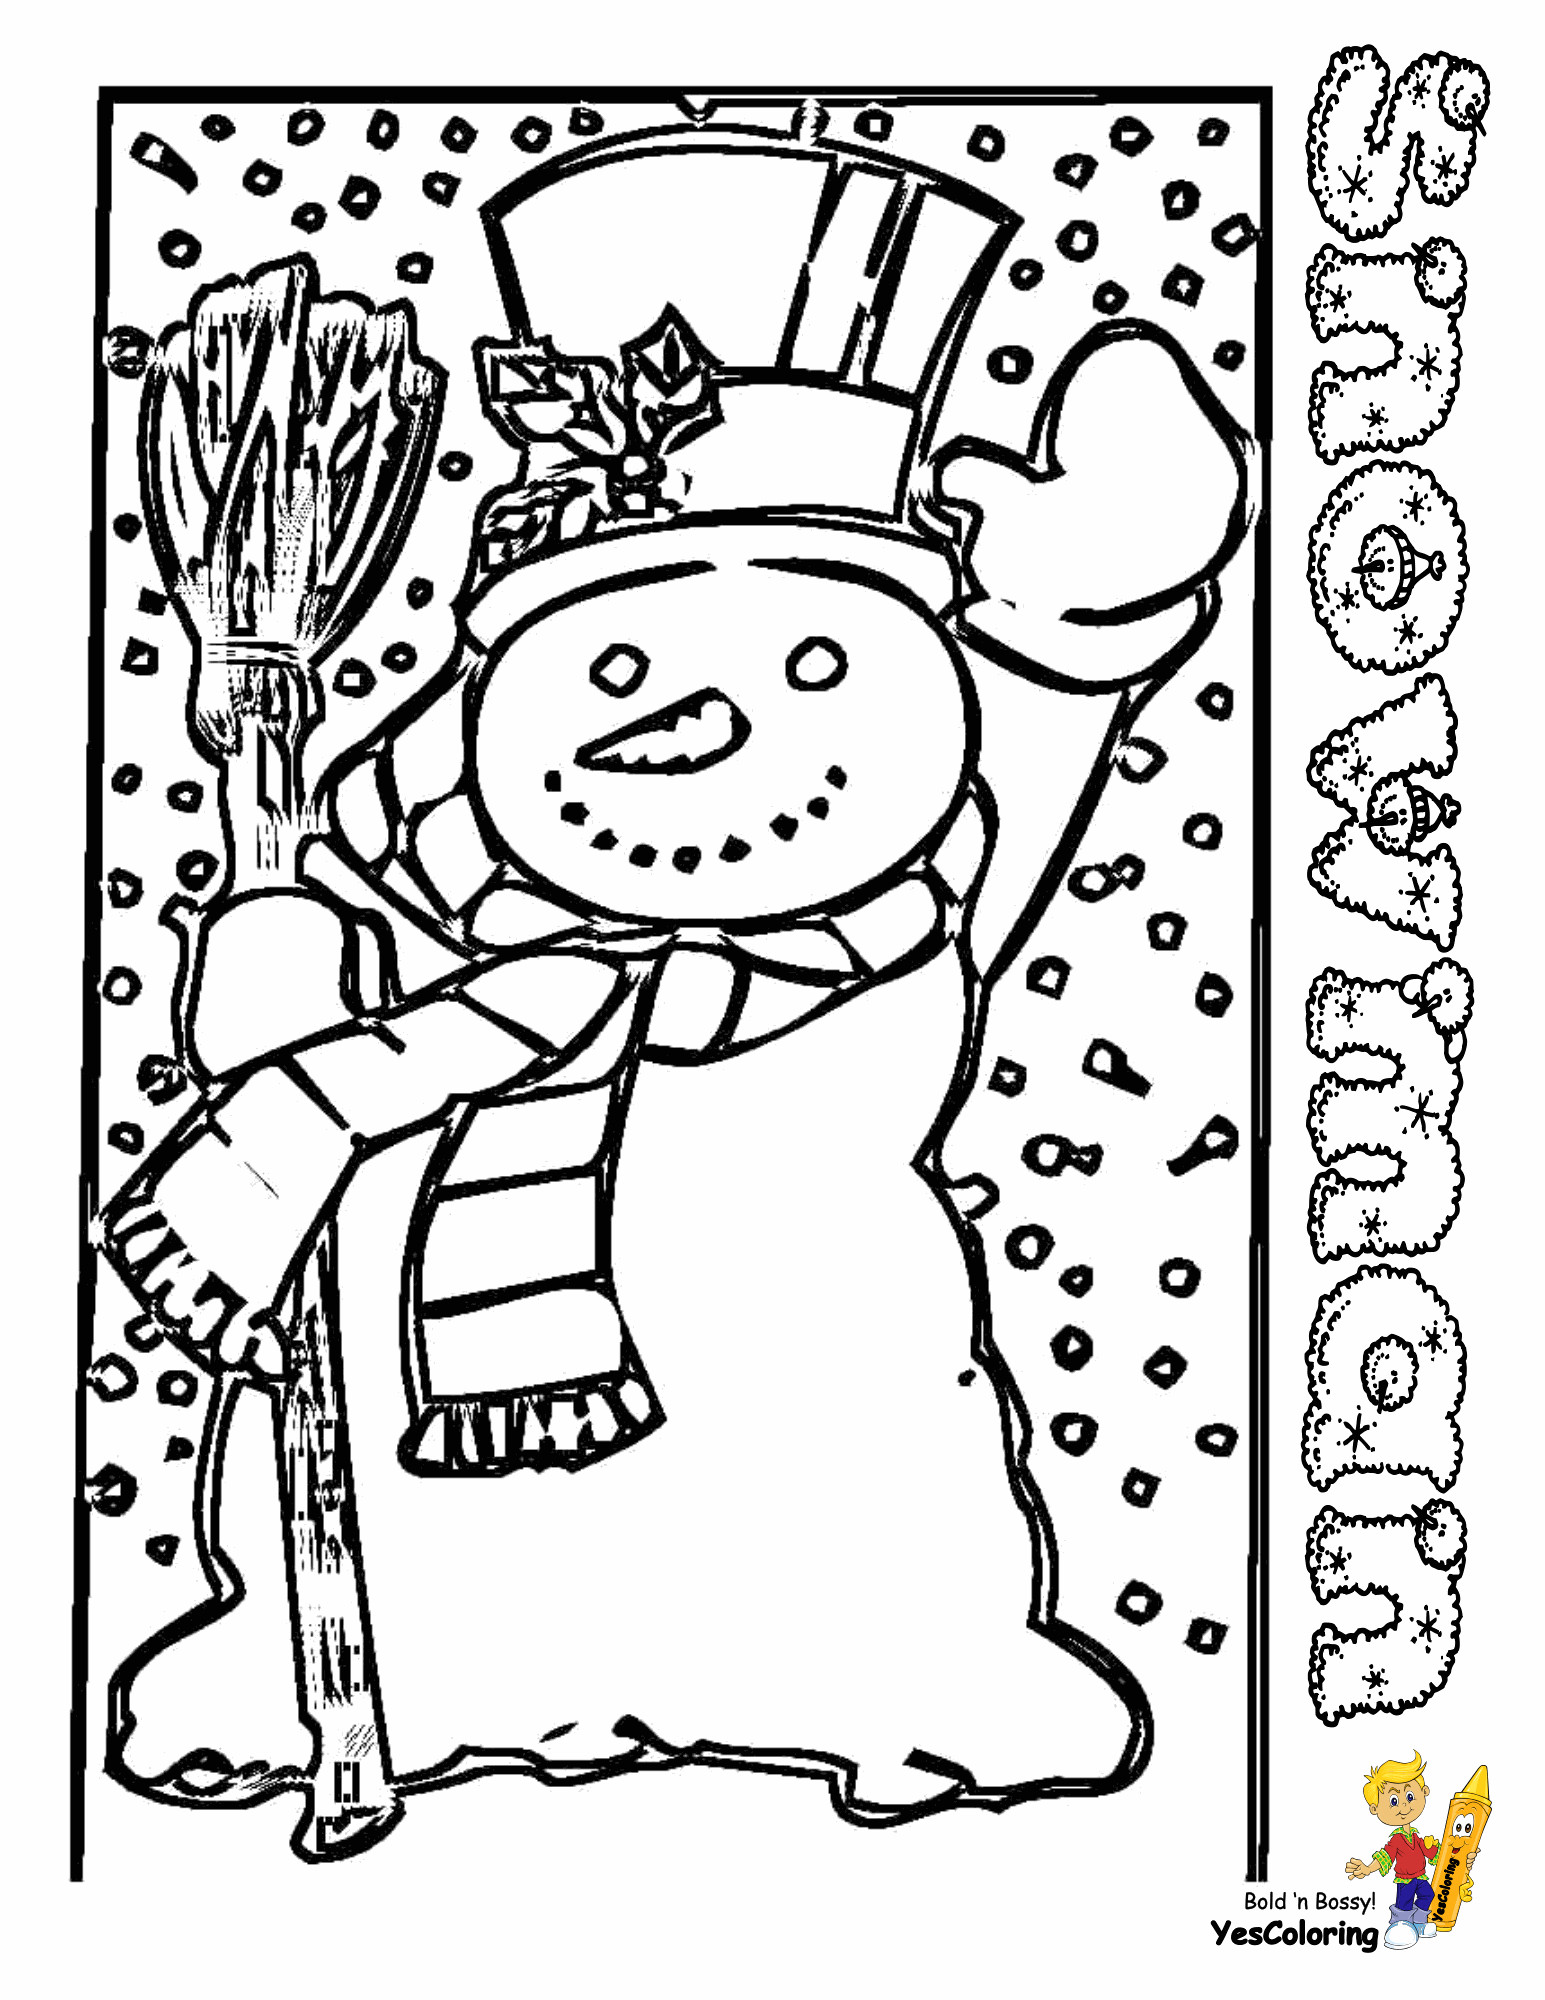 Boys Christmas Coloring Pages
 Cool Coloring Pages to Print Christmas Free